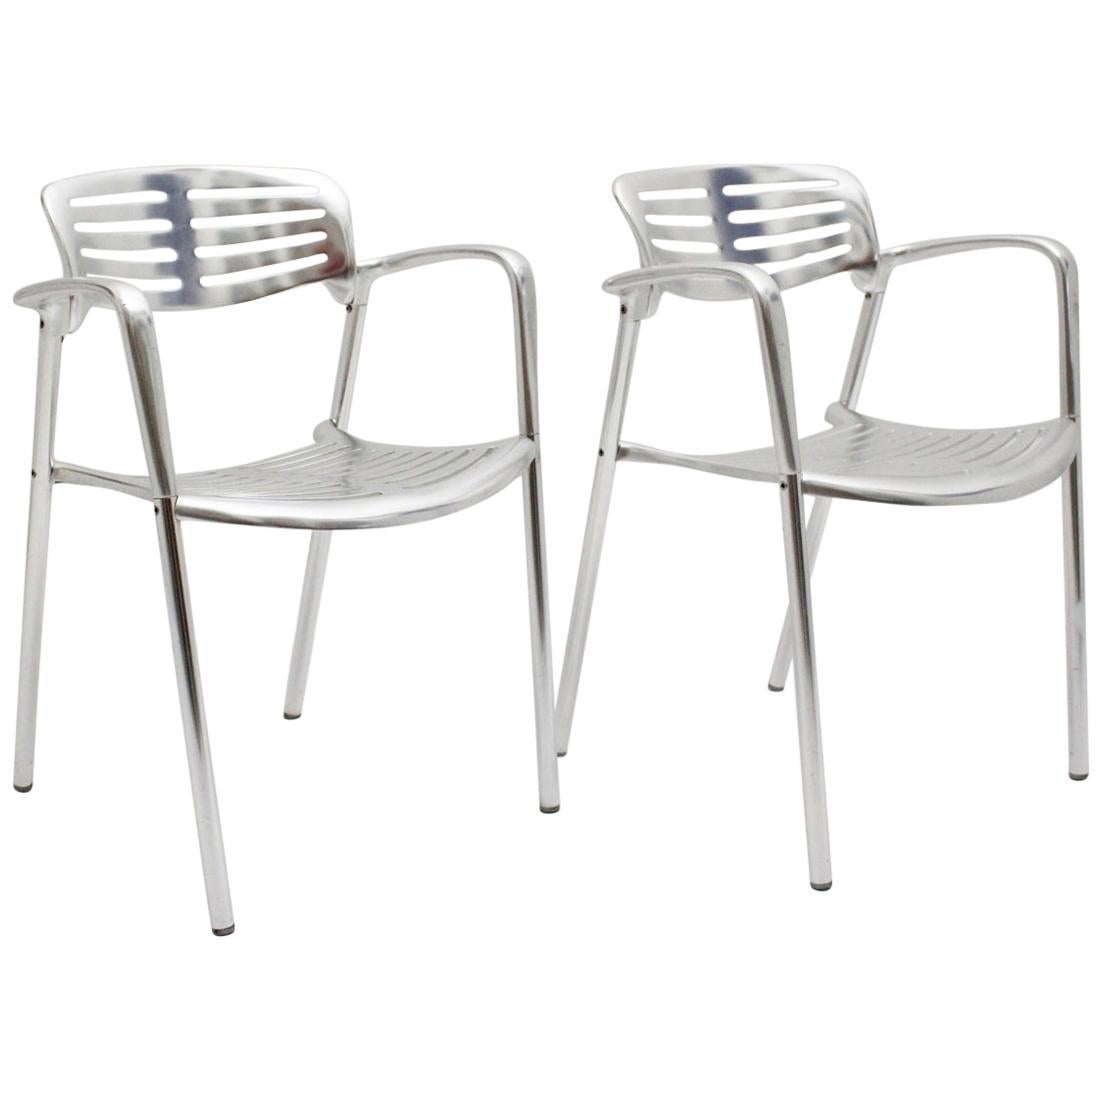 Modern Vintage Pair of Aluminum Chairs by Jorge Pensi, Spain 1986-1988 for Amat